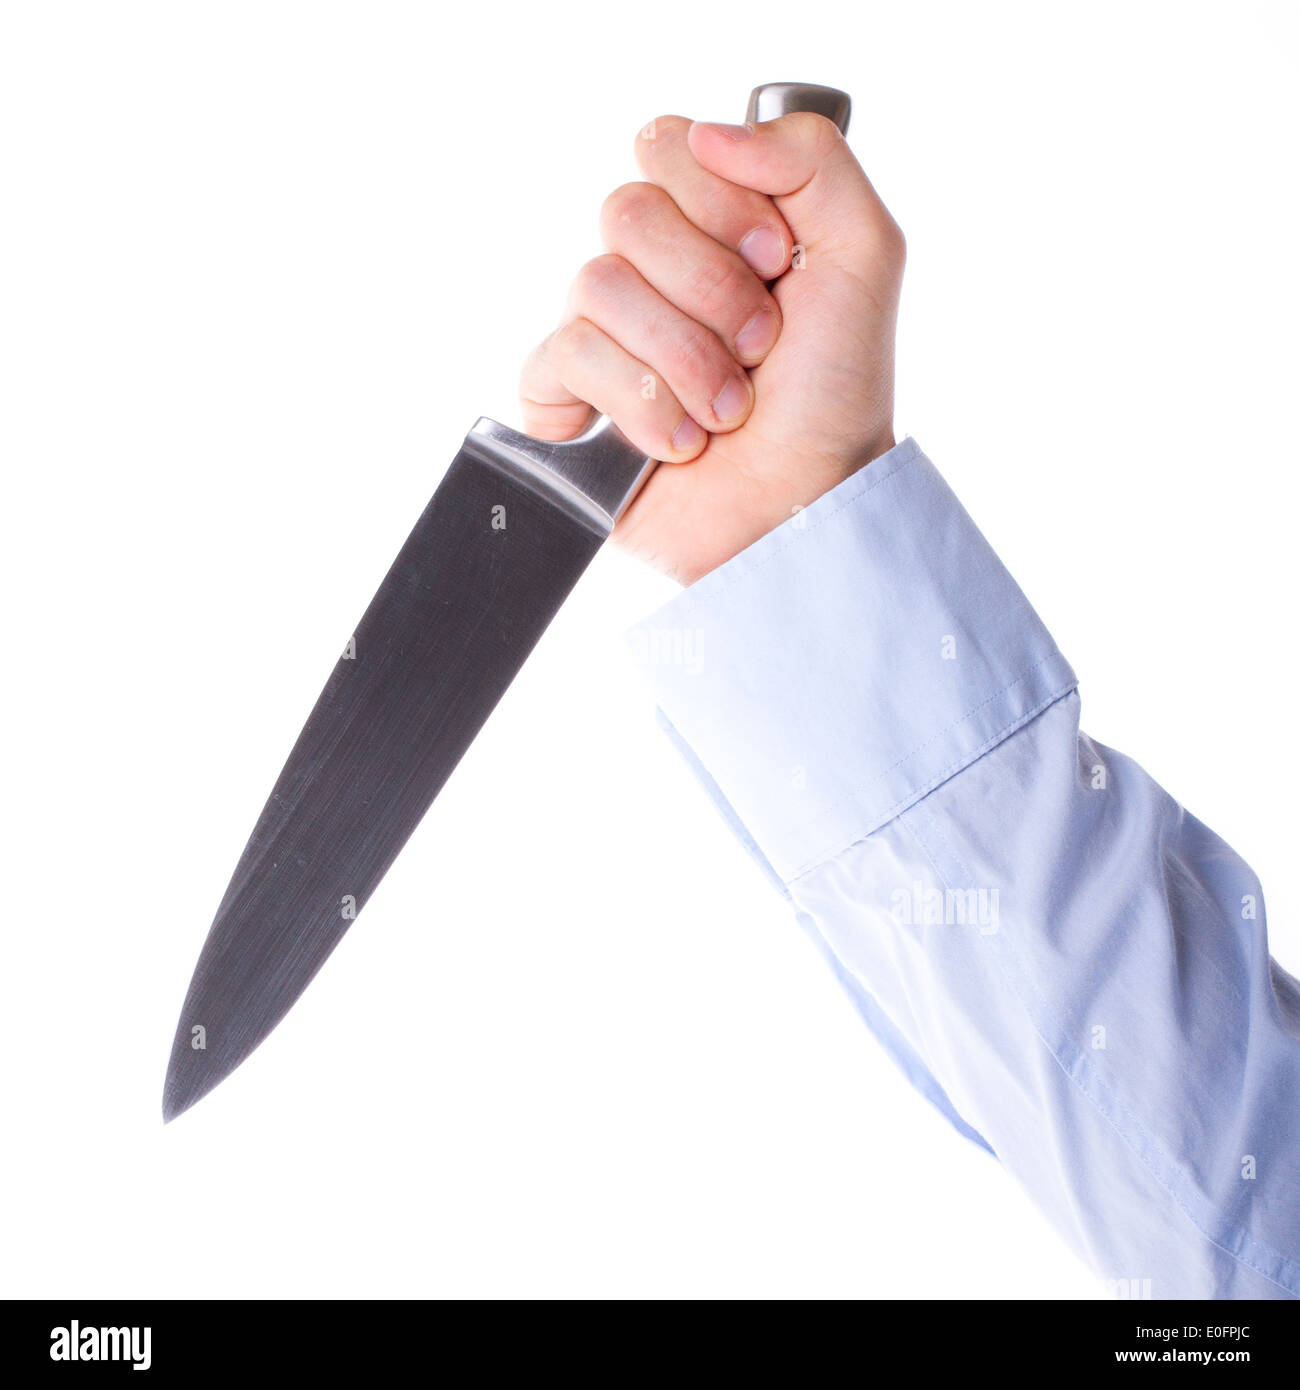 Male with a sharp knife in it's hand Stock Photo